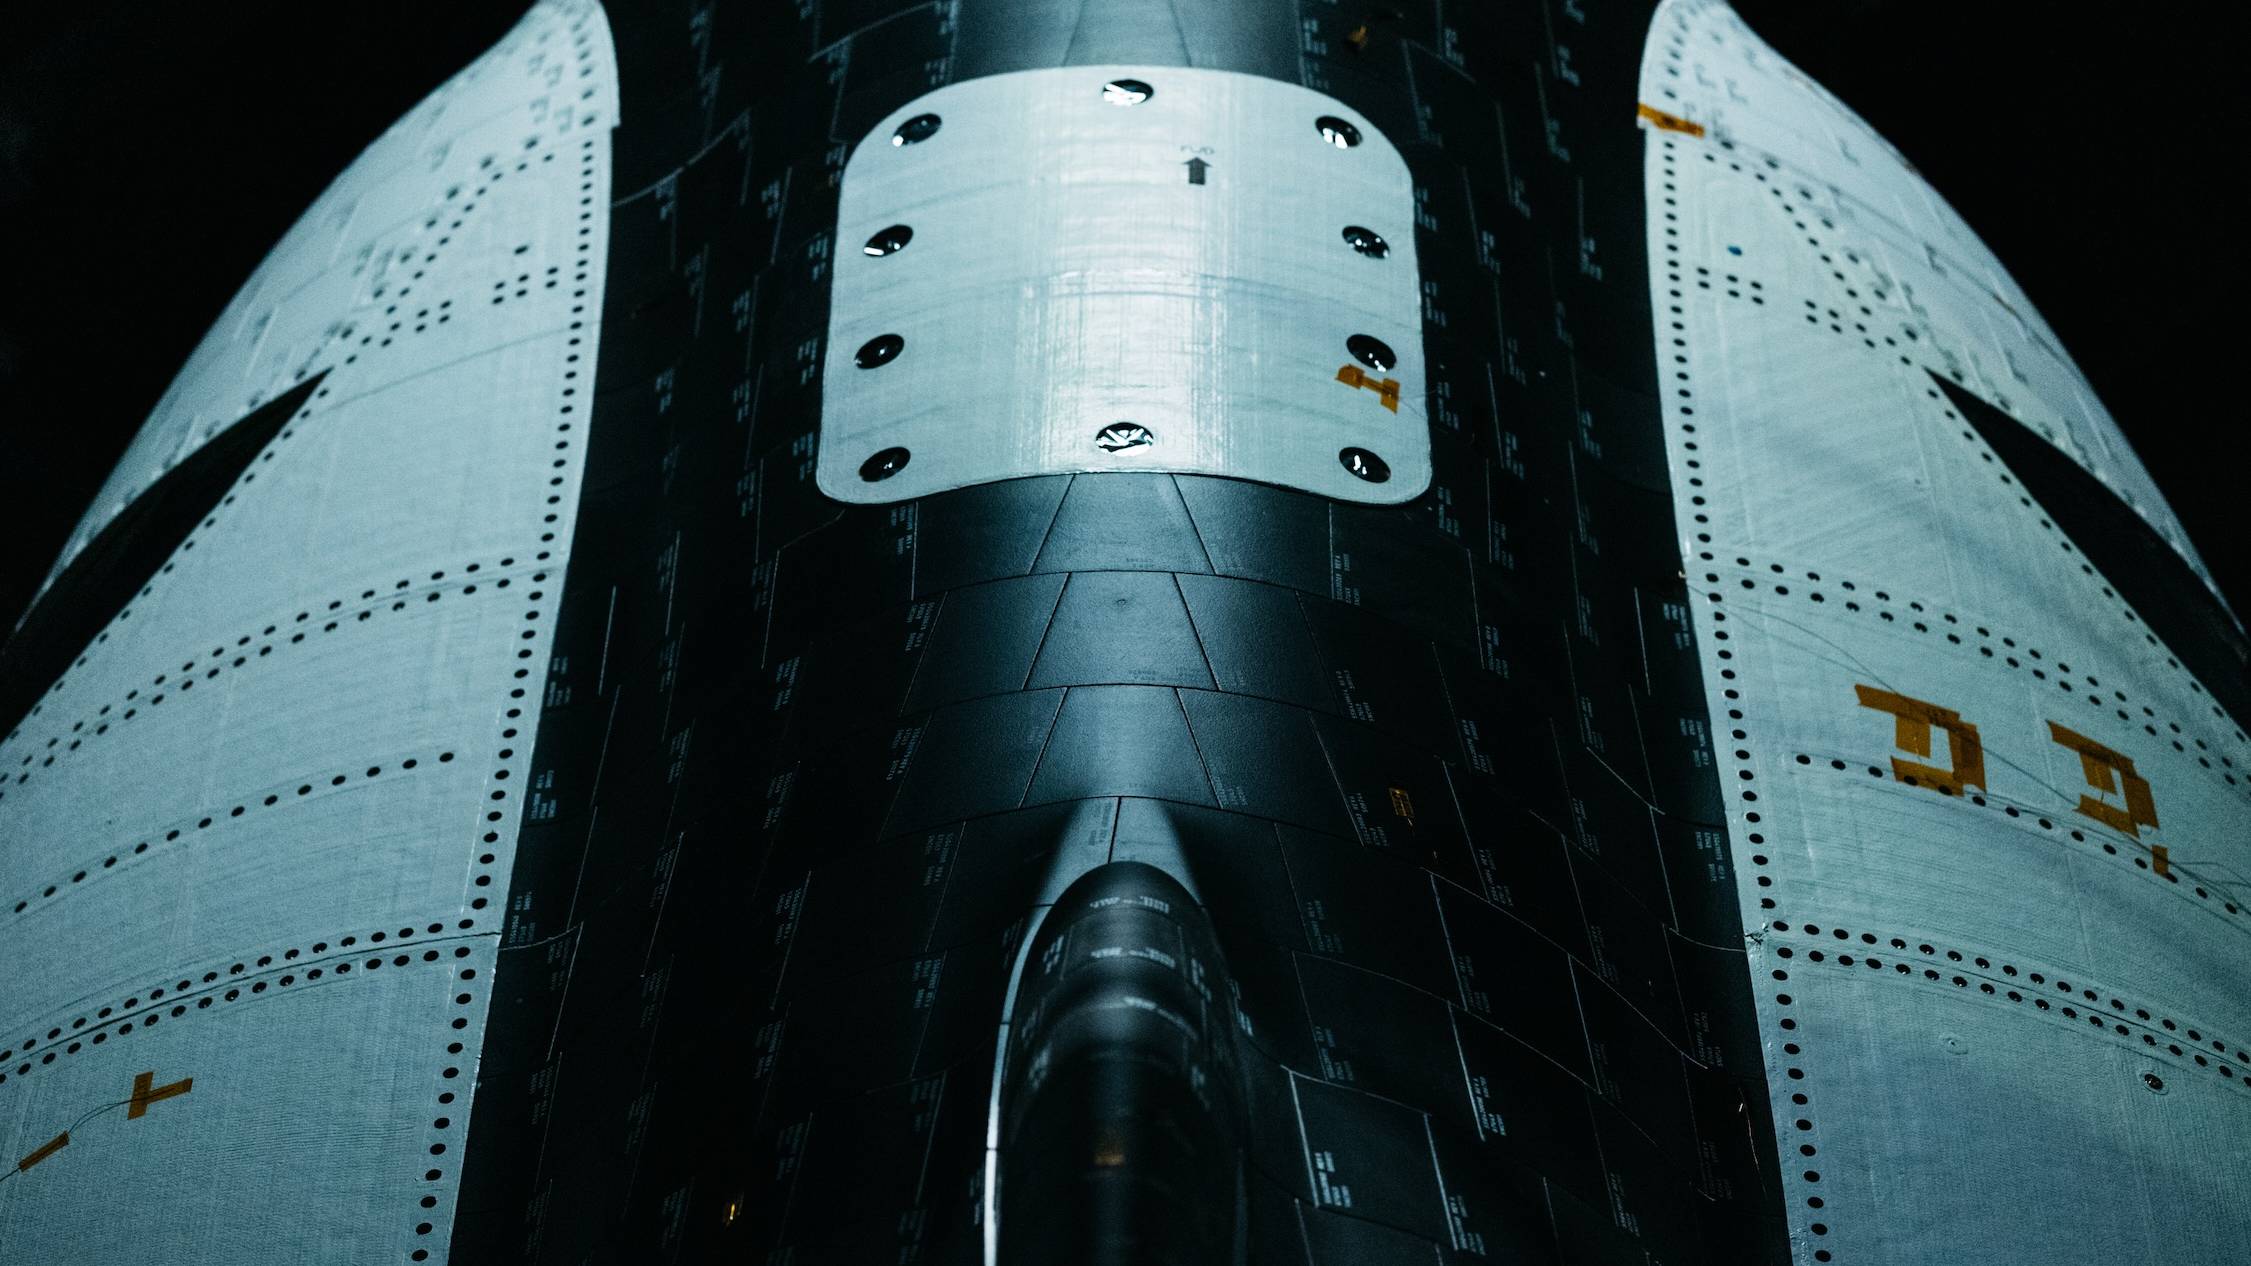 closeup view of a black and white space plane, showing black heat-shield tiles and white metal studded with rivets